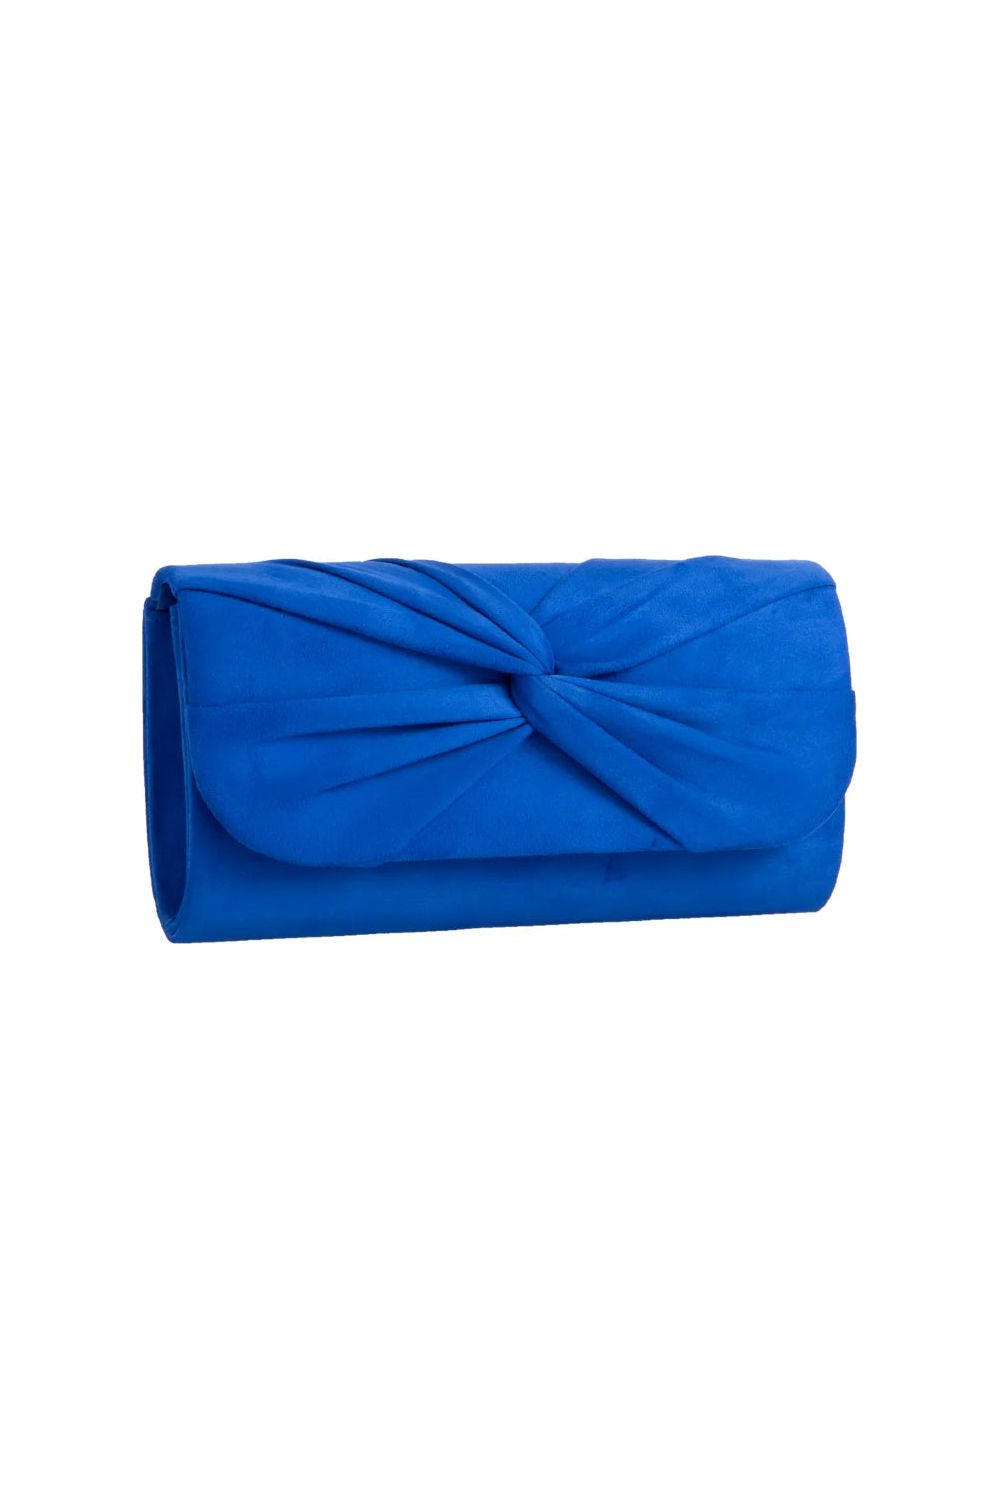 Royal Blue Suede Clutch Bag With Knot Detail ALJ2724